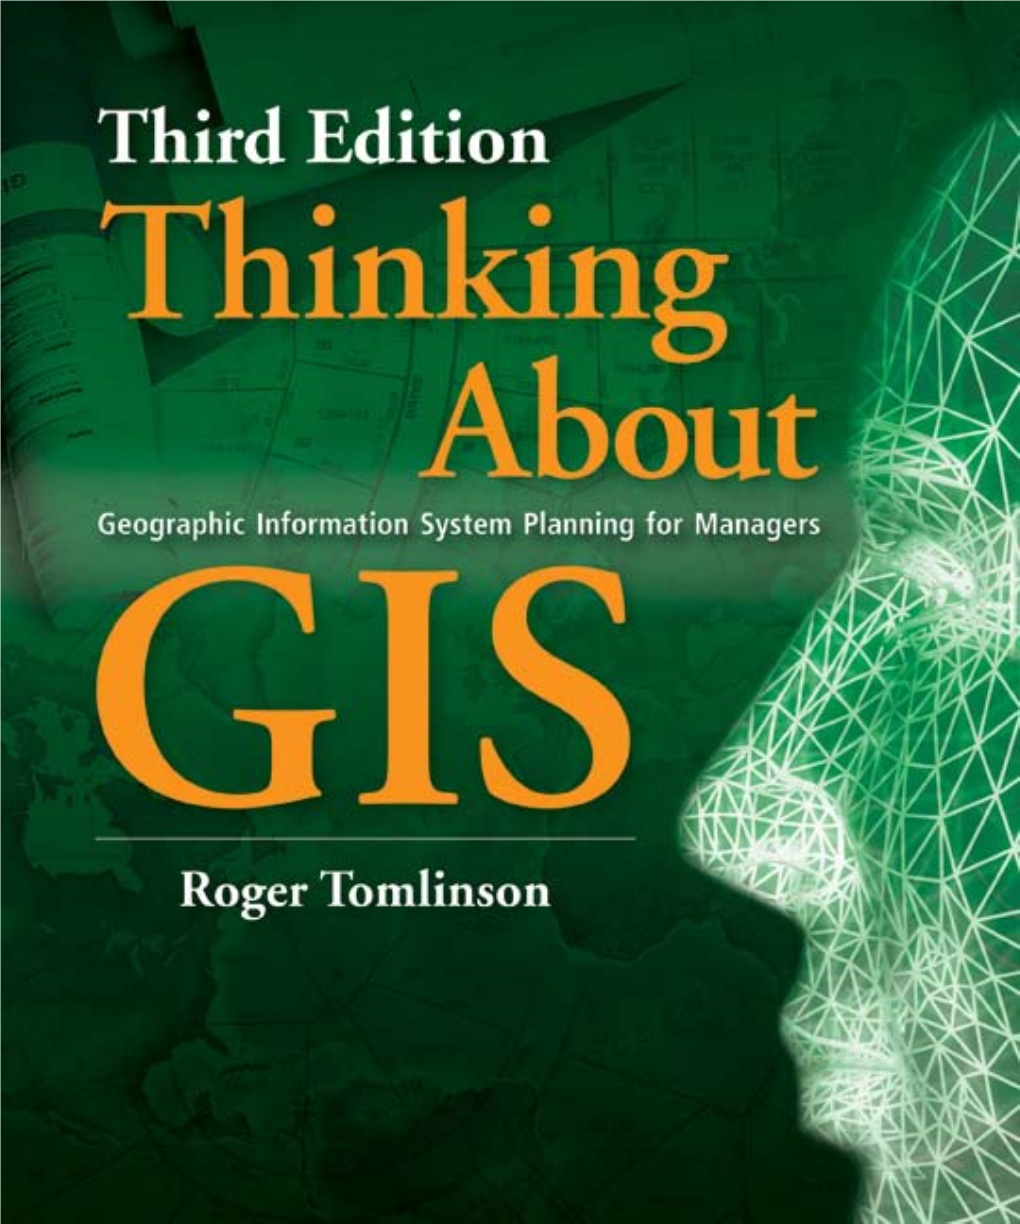 Thinking About GIS: Geographic Information System Planning, Third Edition Are Highlighted Below